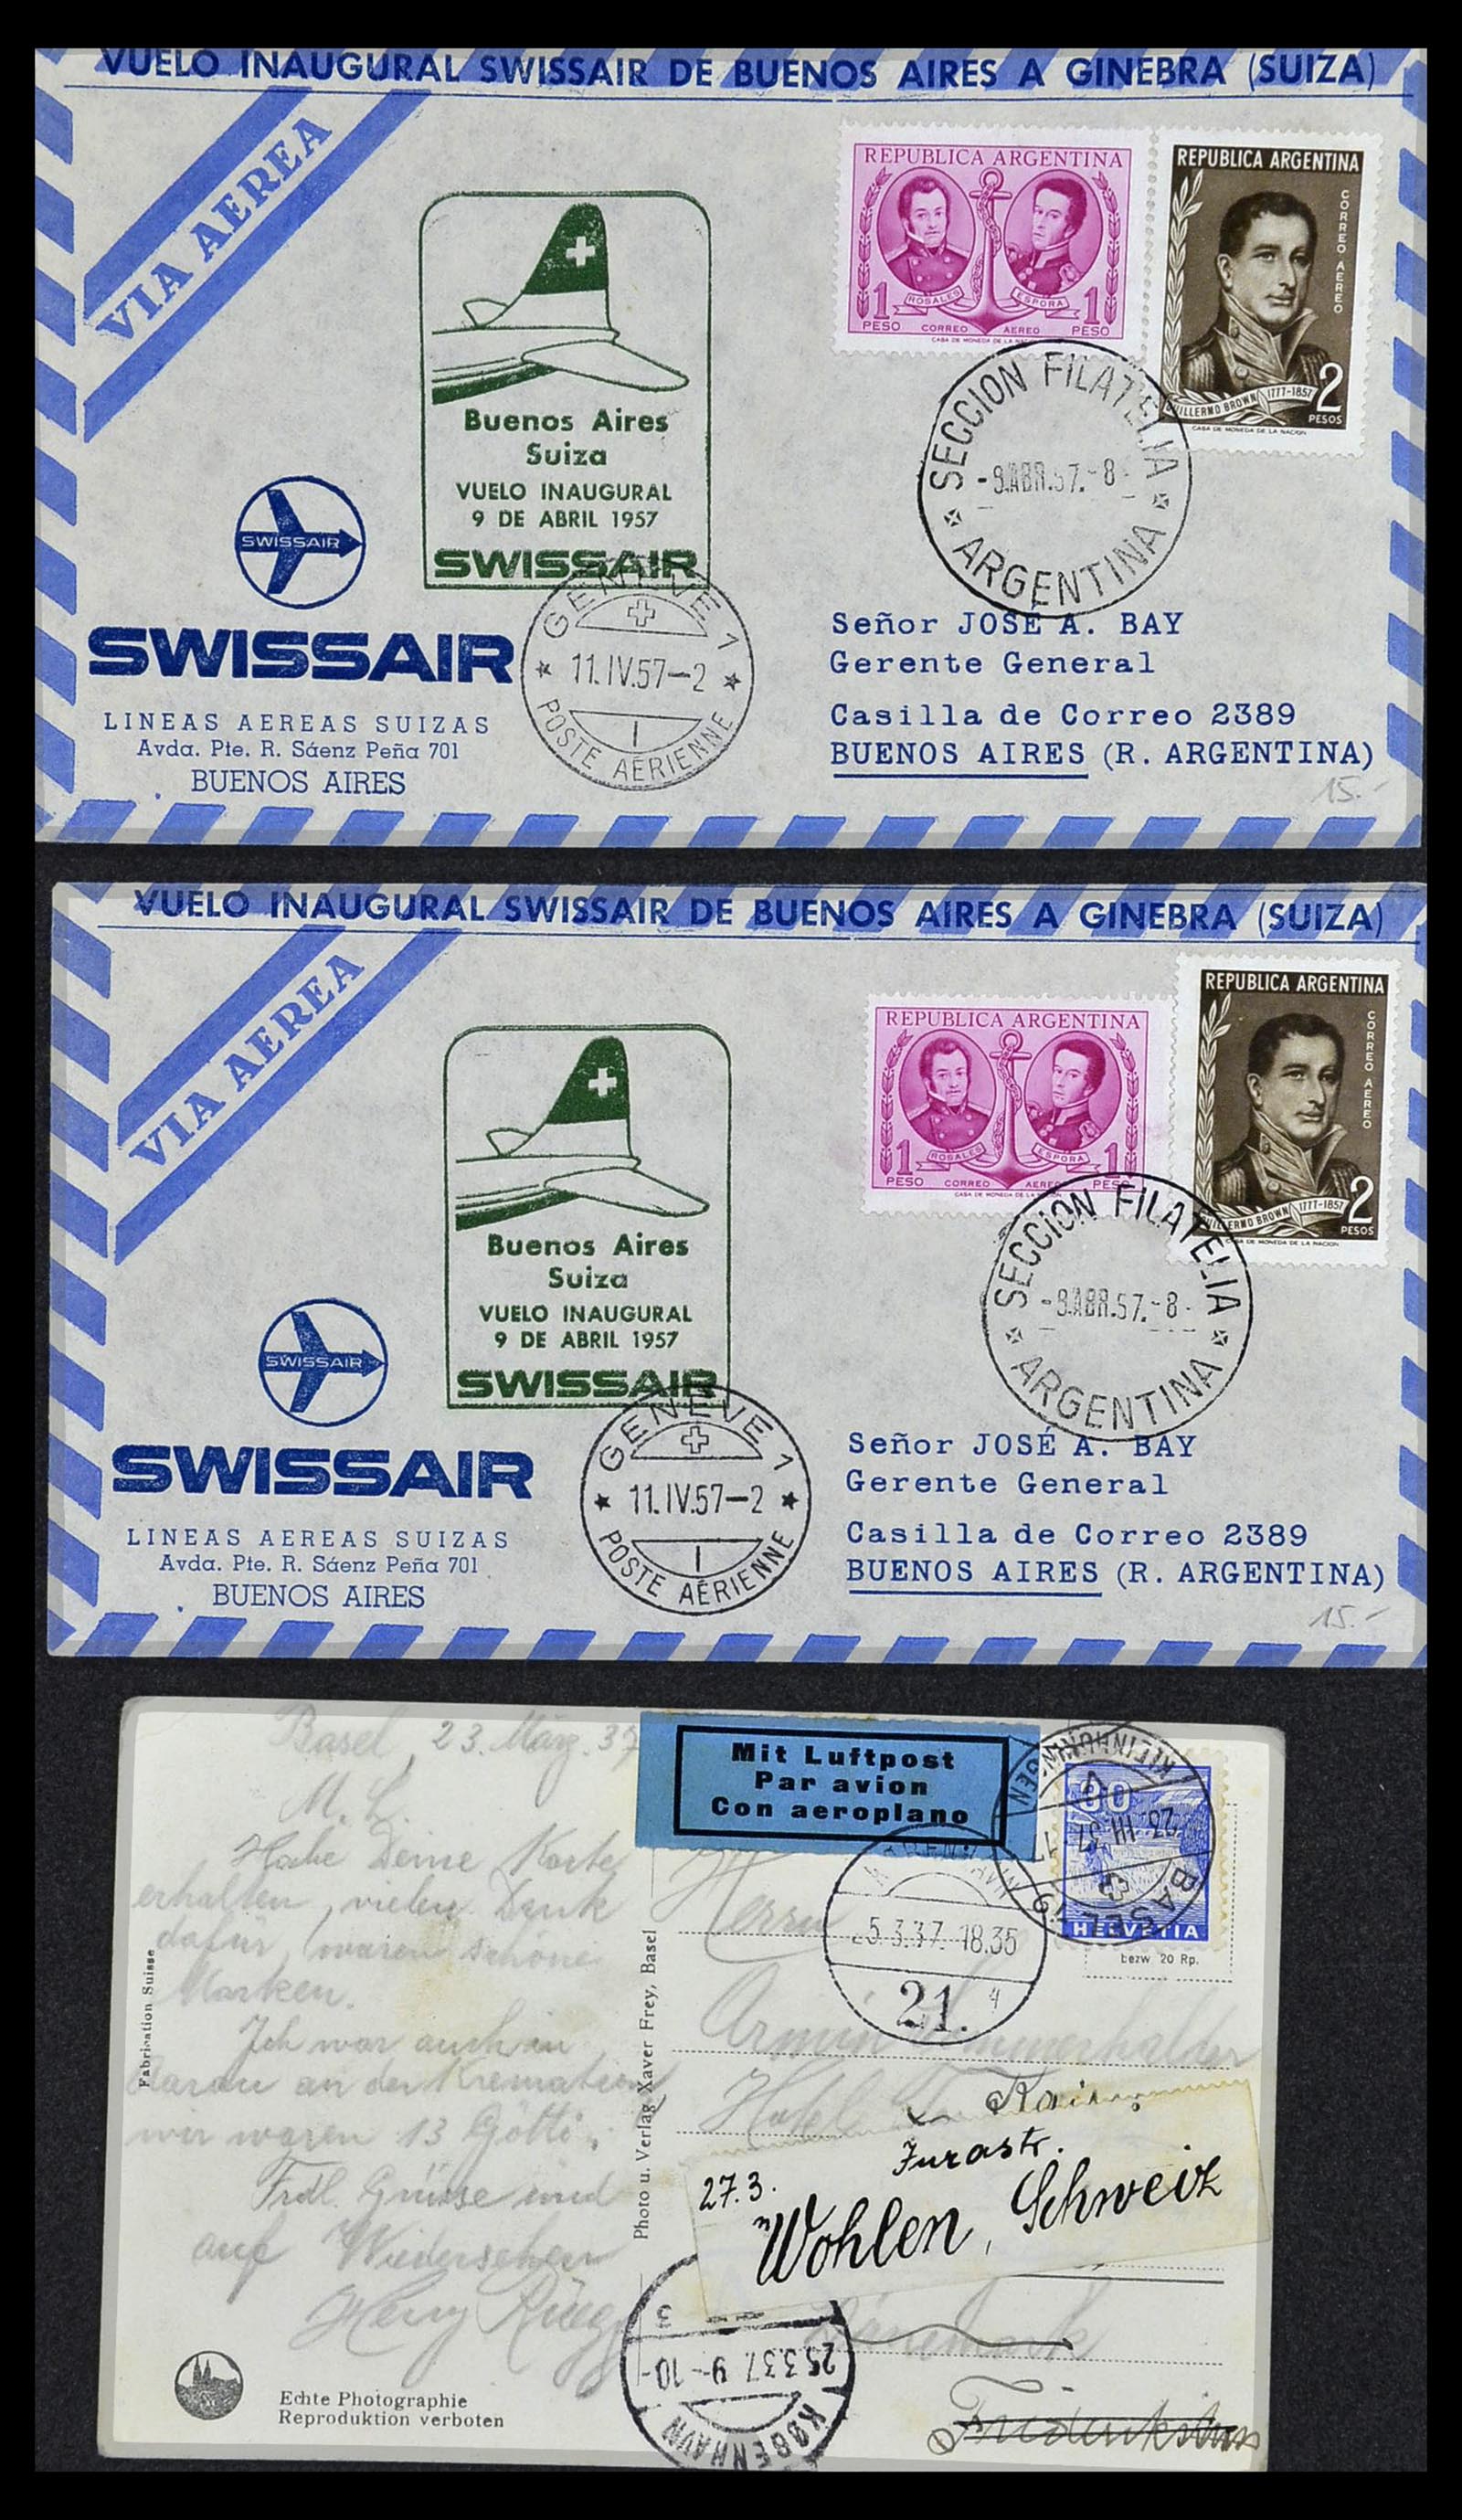 34141 047 - Stamp collection 34141 Switzerland airmail covers 1920-1960.